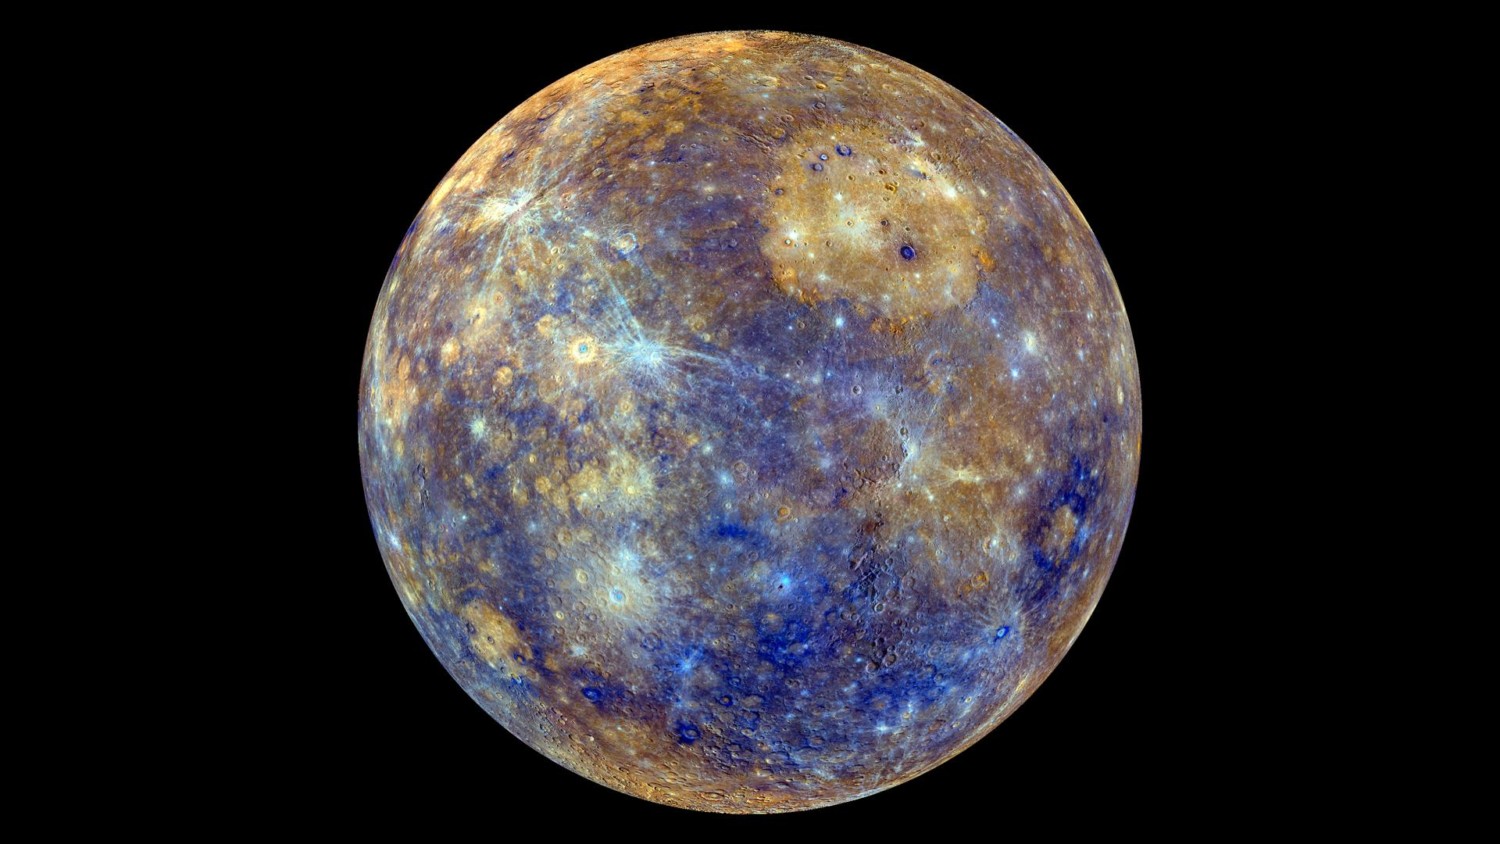 A colorful image of Mercury